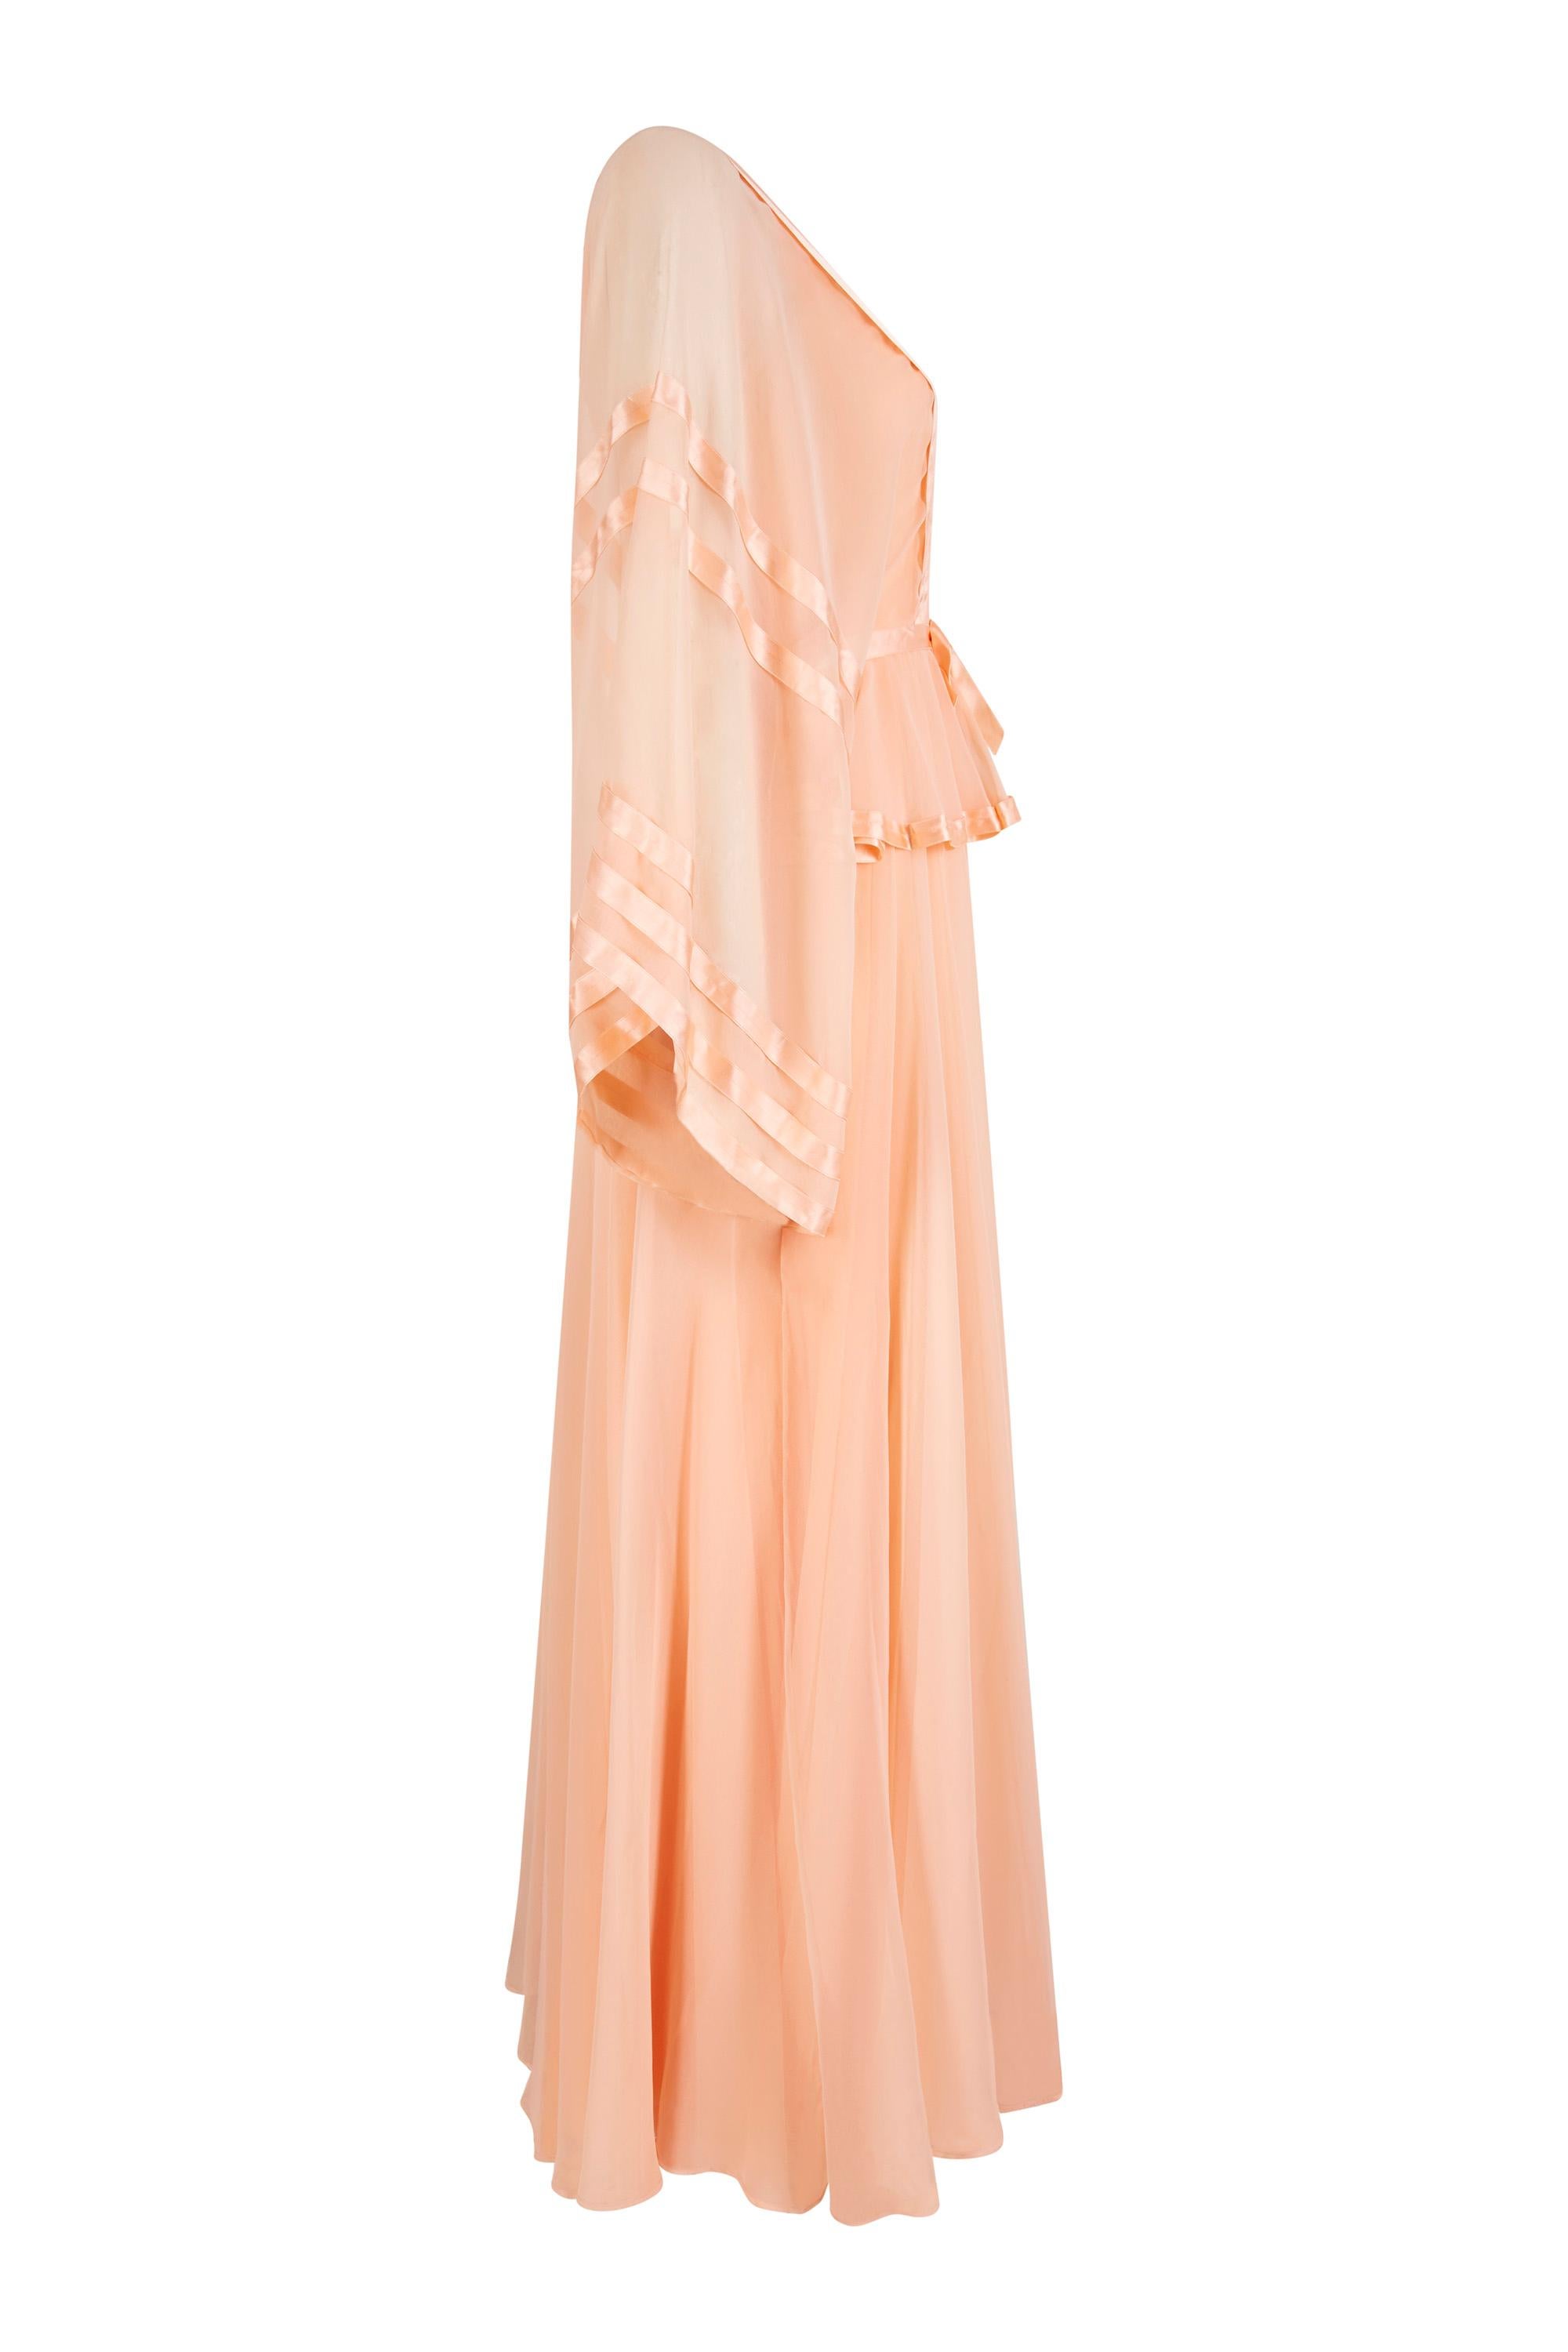 This captivating 1970s pale peach chiffon dress with ribbon trim is by British label Jean Varon and is a beautiful example of the designer's penchant for softer feminine lines that were synonymous with his work during this era. The dress is